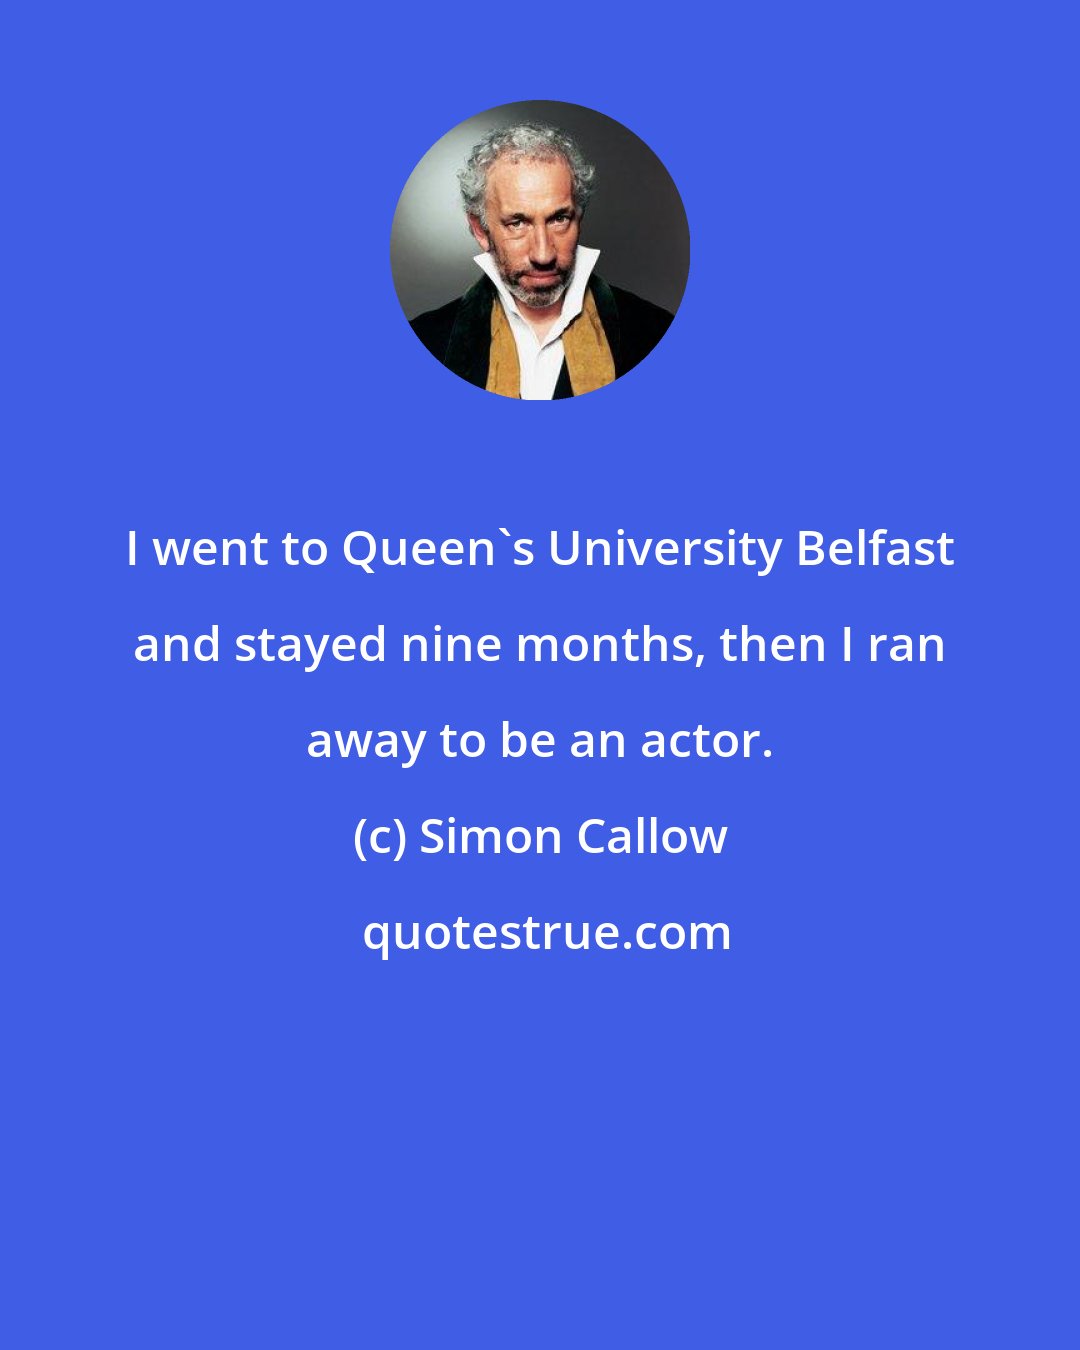 Simon Callow: I went to Queen's University Belfast and stayed nine months, then I ran away to be an actor.